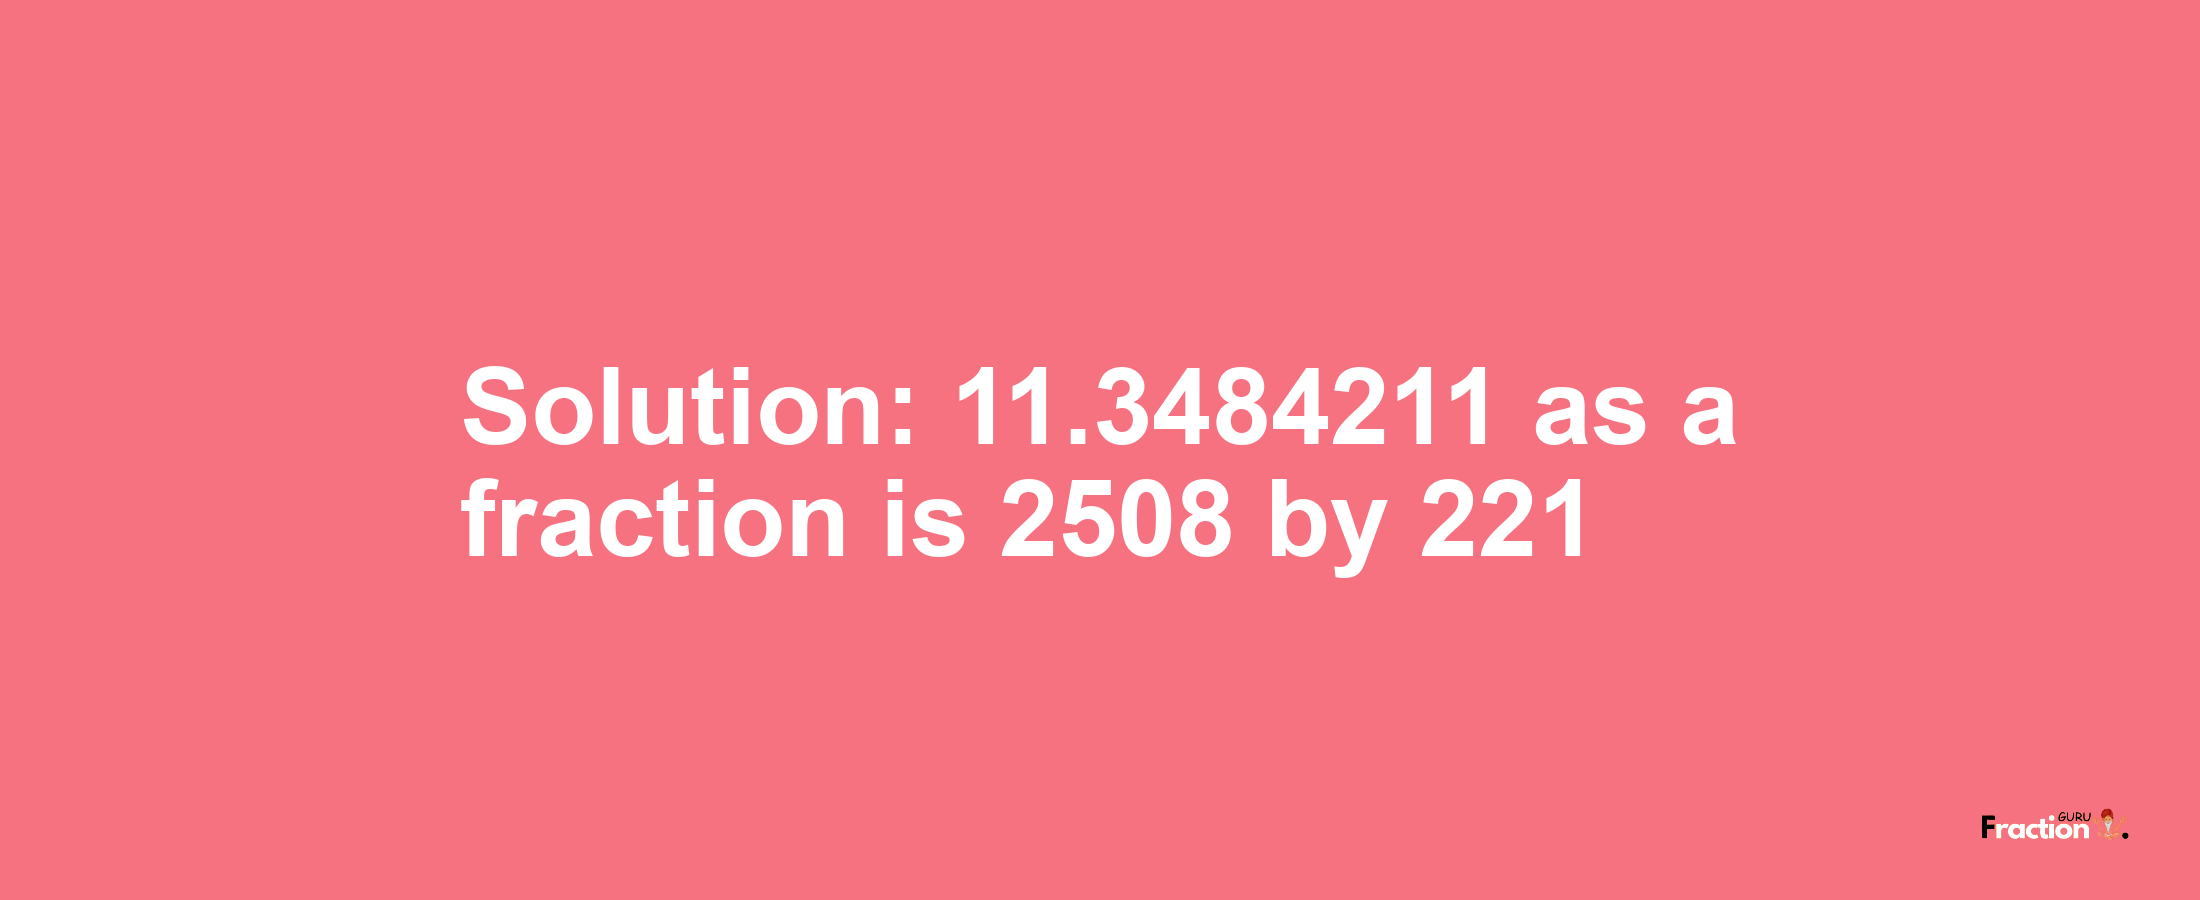 Solution:11.3484211 as a fraction is 2508/221